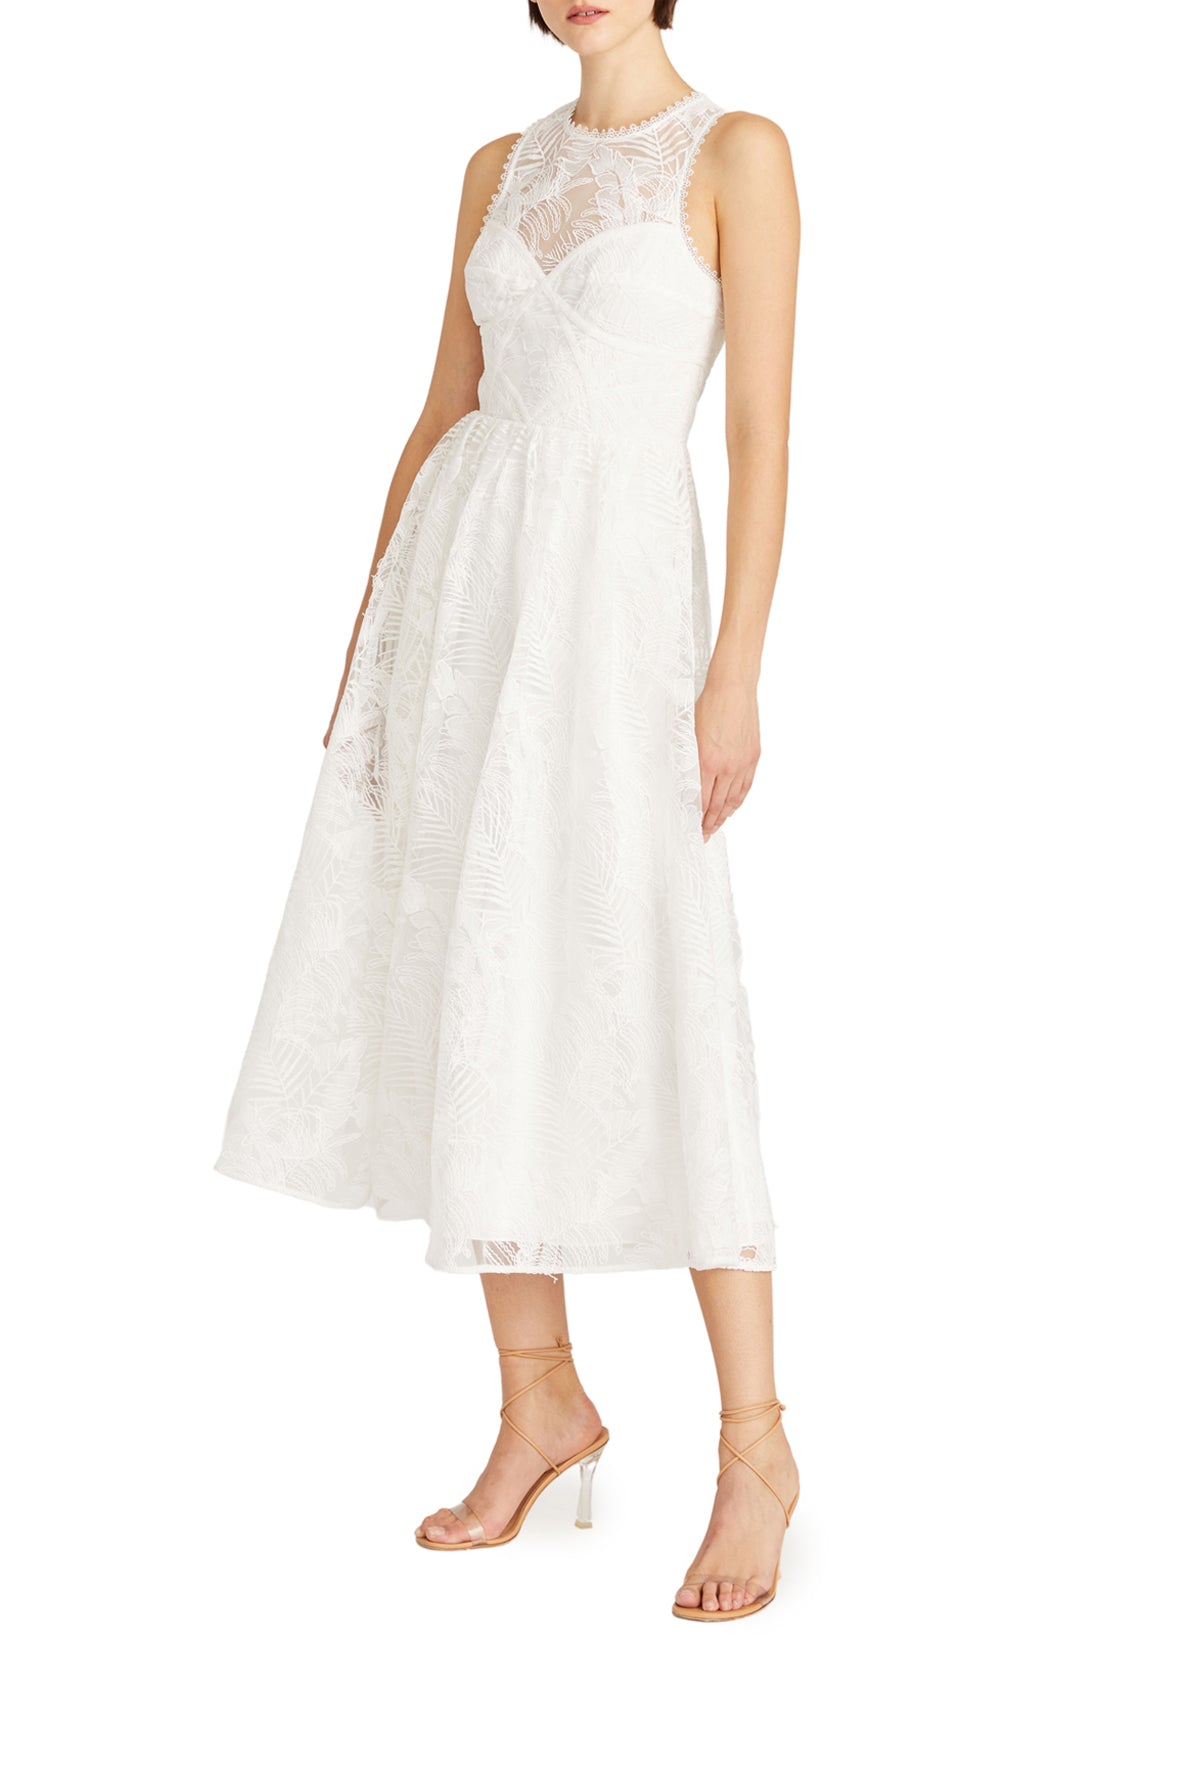 ML Monique Lhuillier ivory embroidered tulle midi dress.